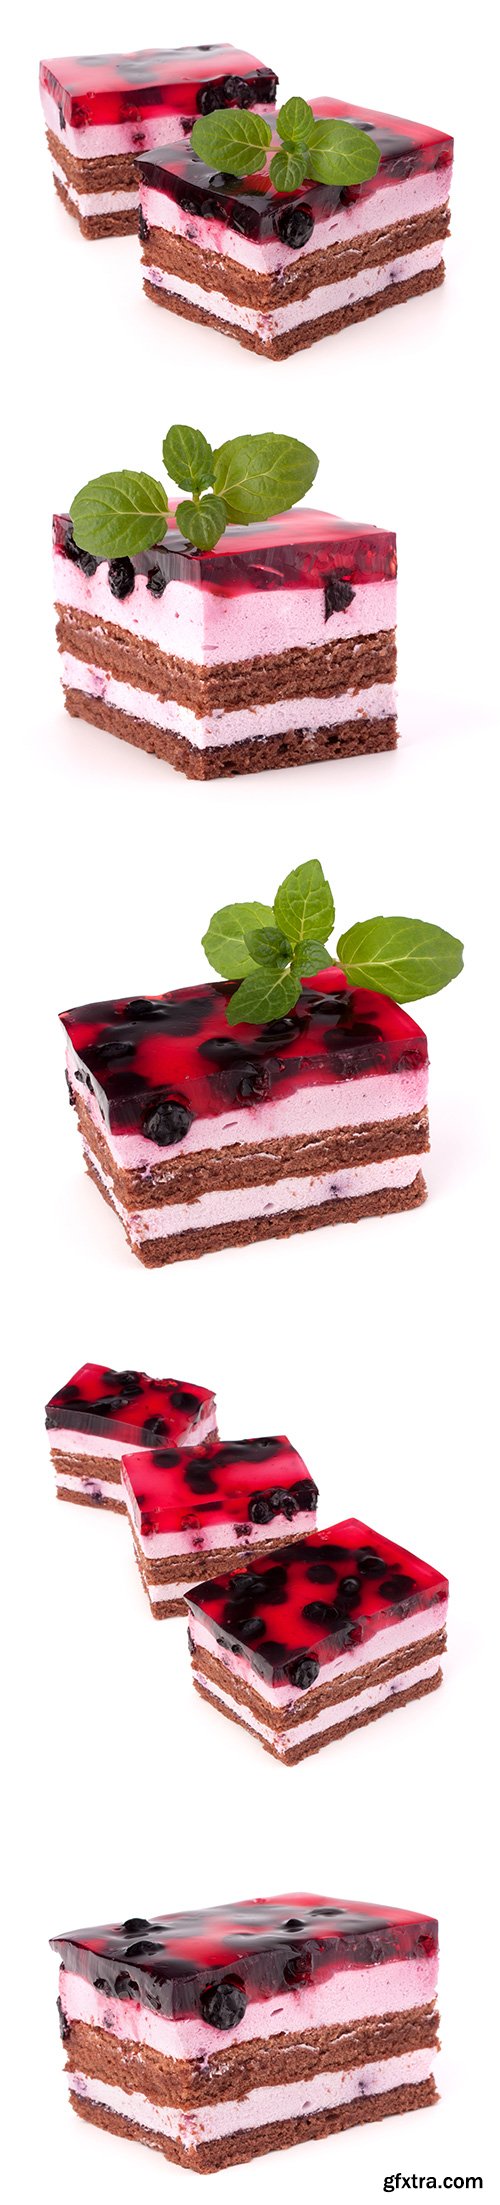 Delicious Cake Piece Isolated - 6xJPGs